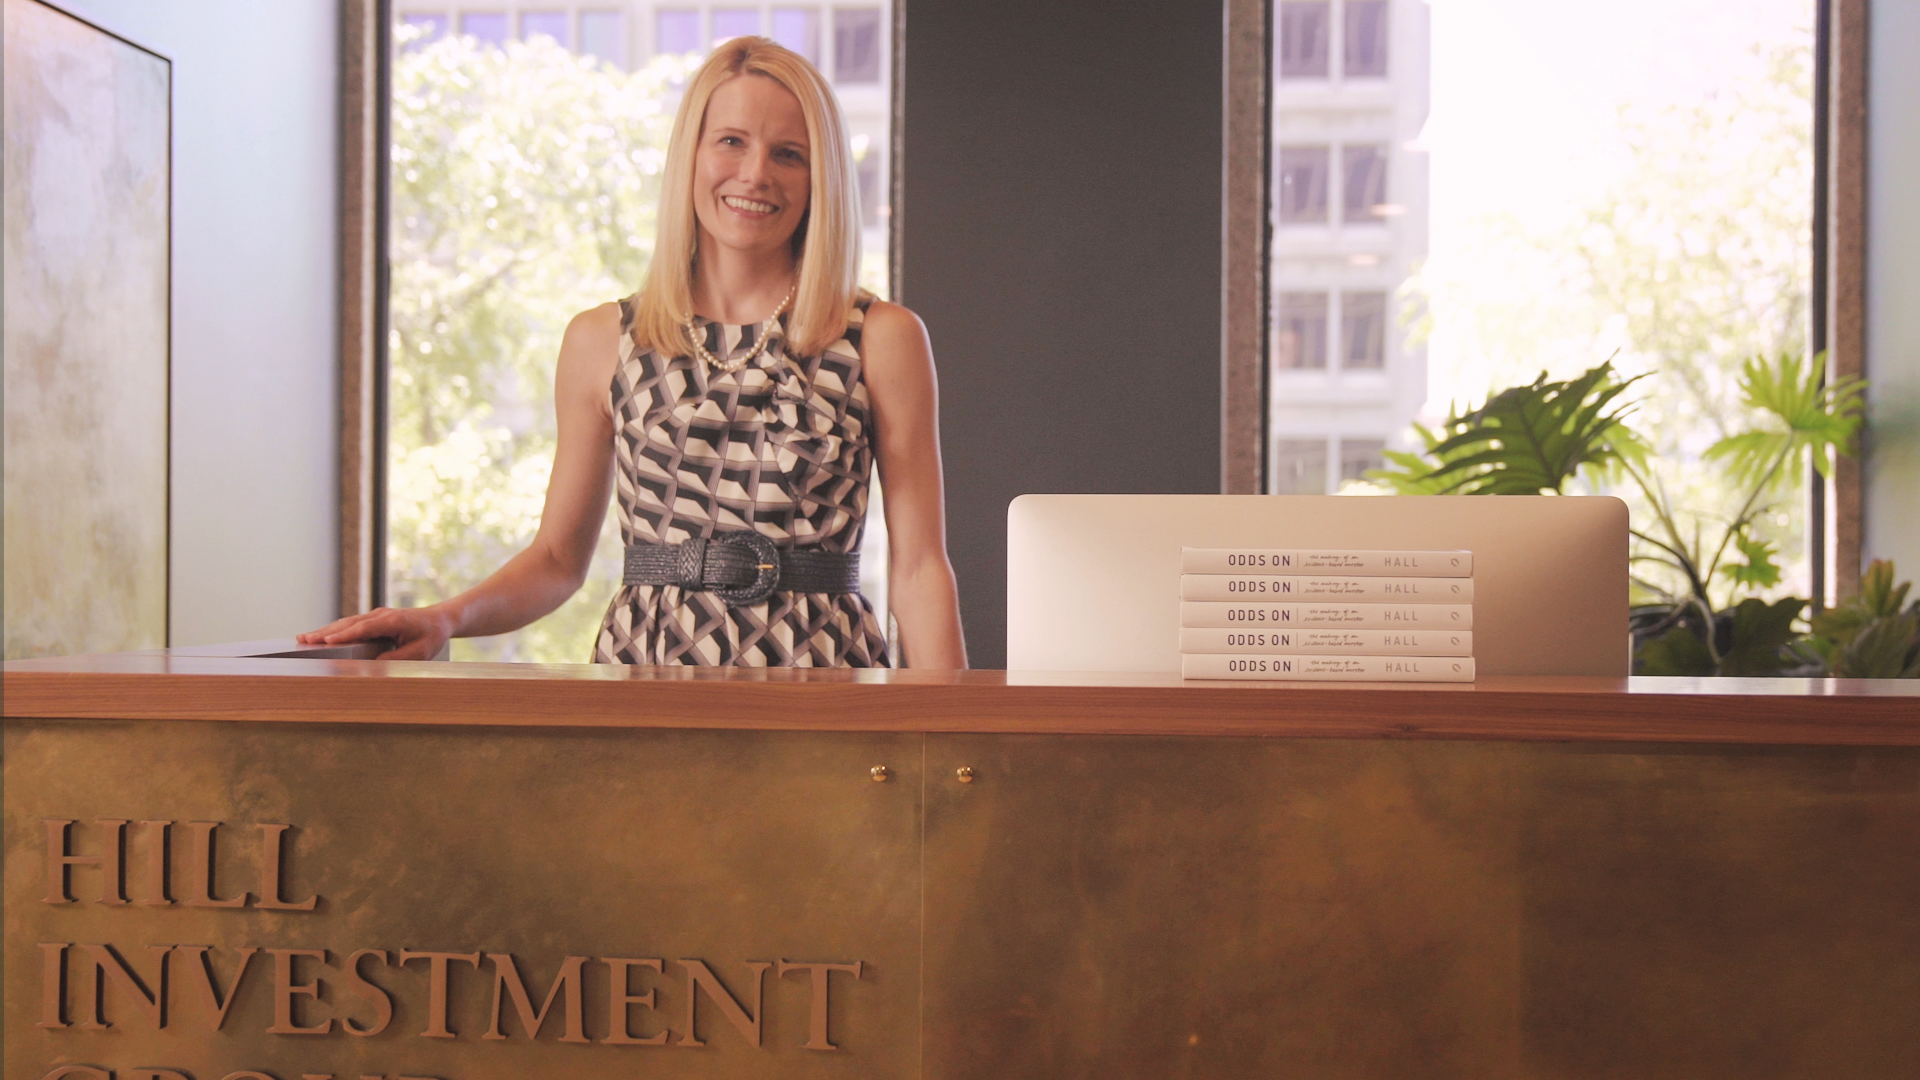 Katie at Hill Investment Group